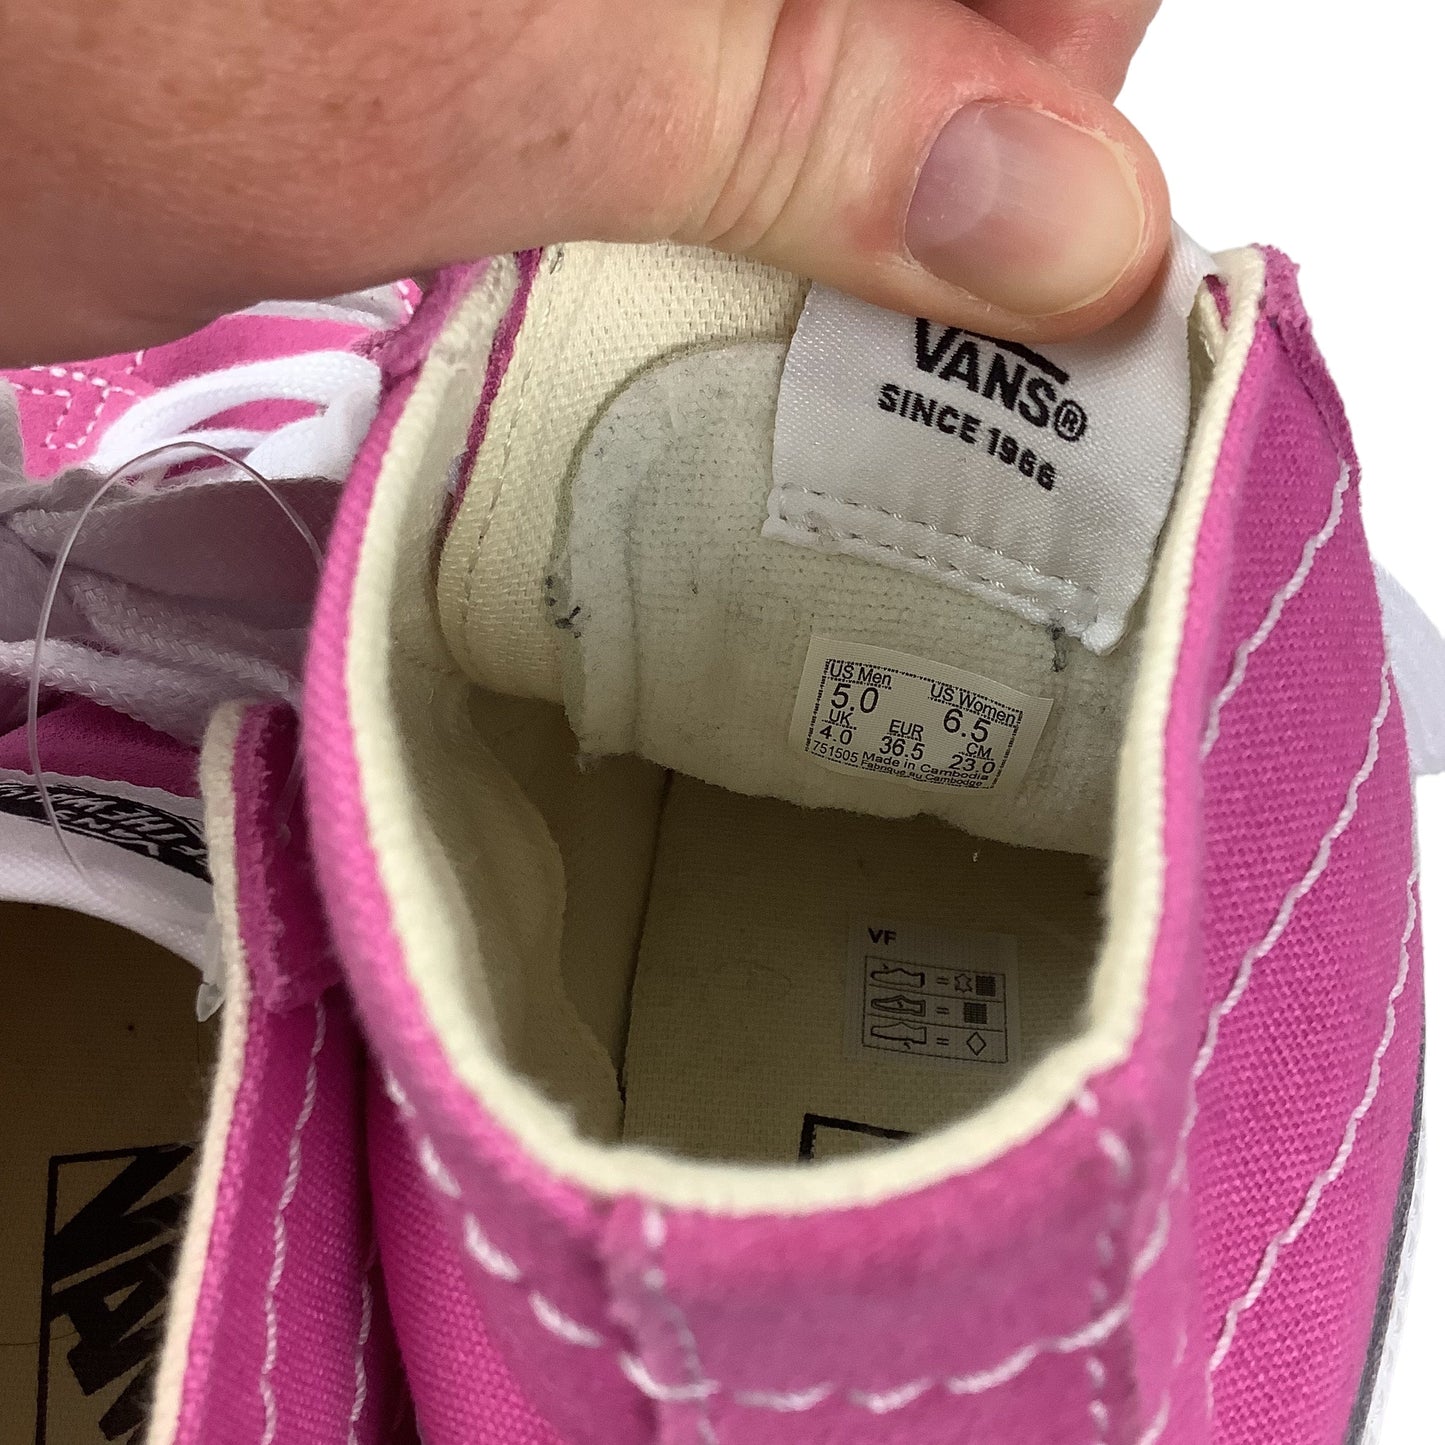 Pink Shoes Sneakers Vans, Size 6.5